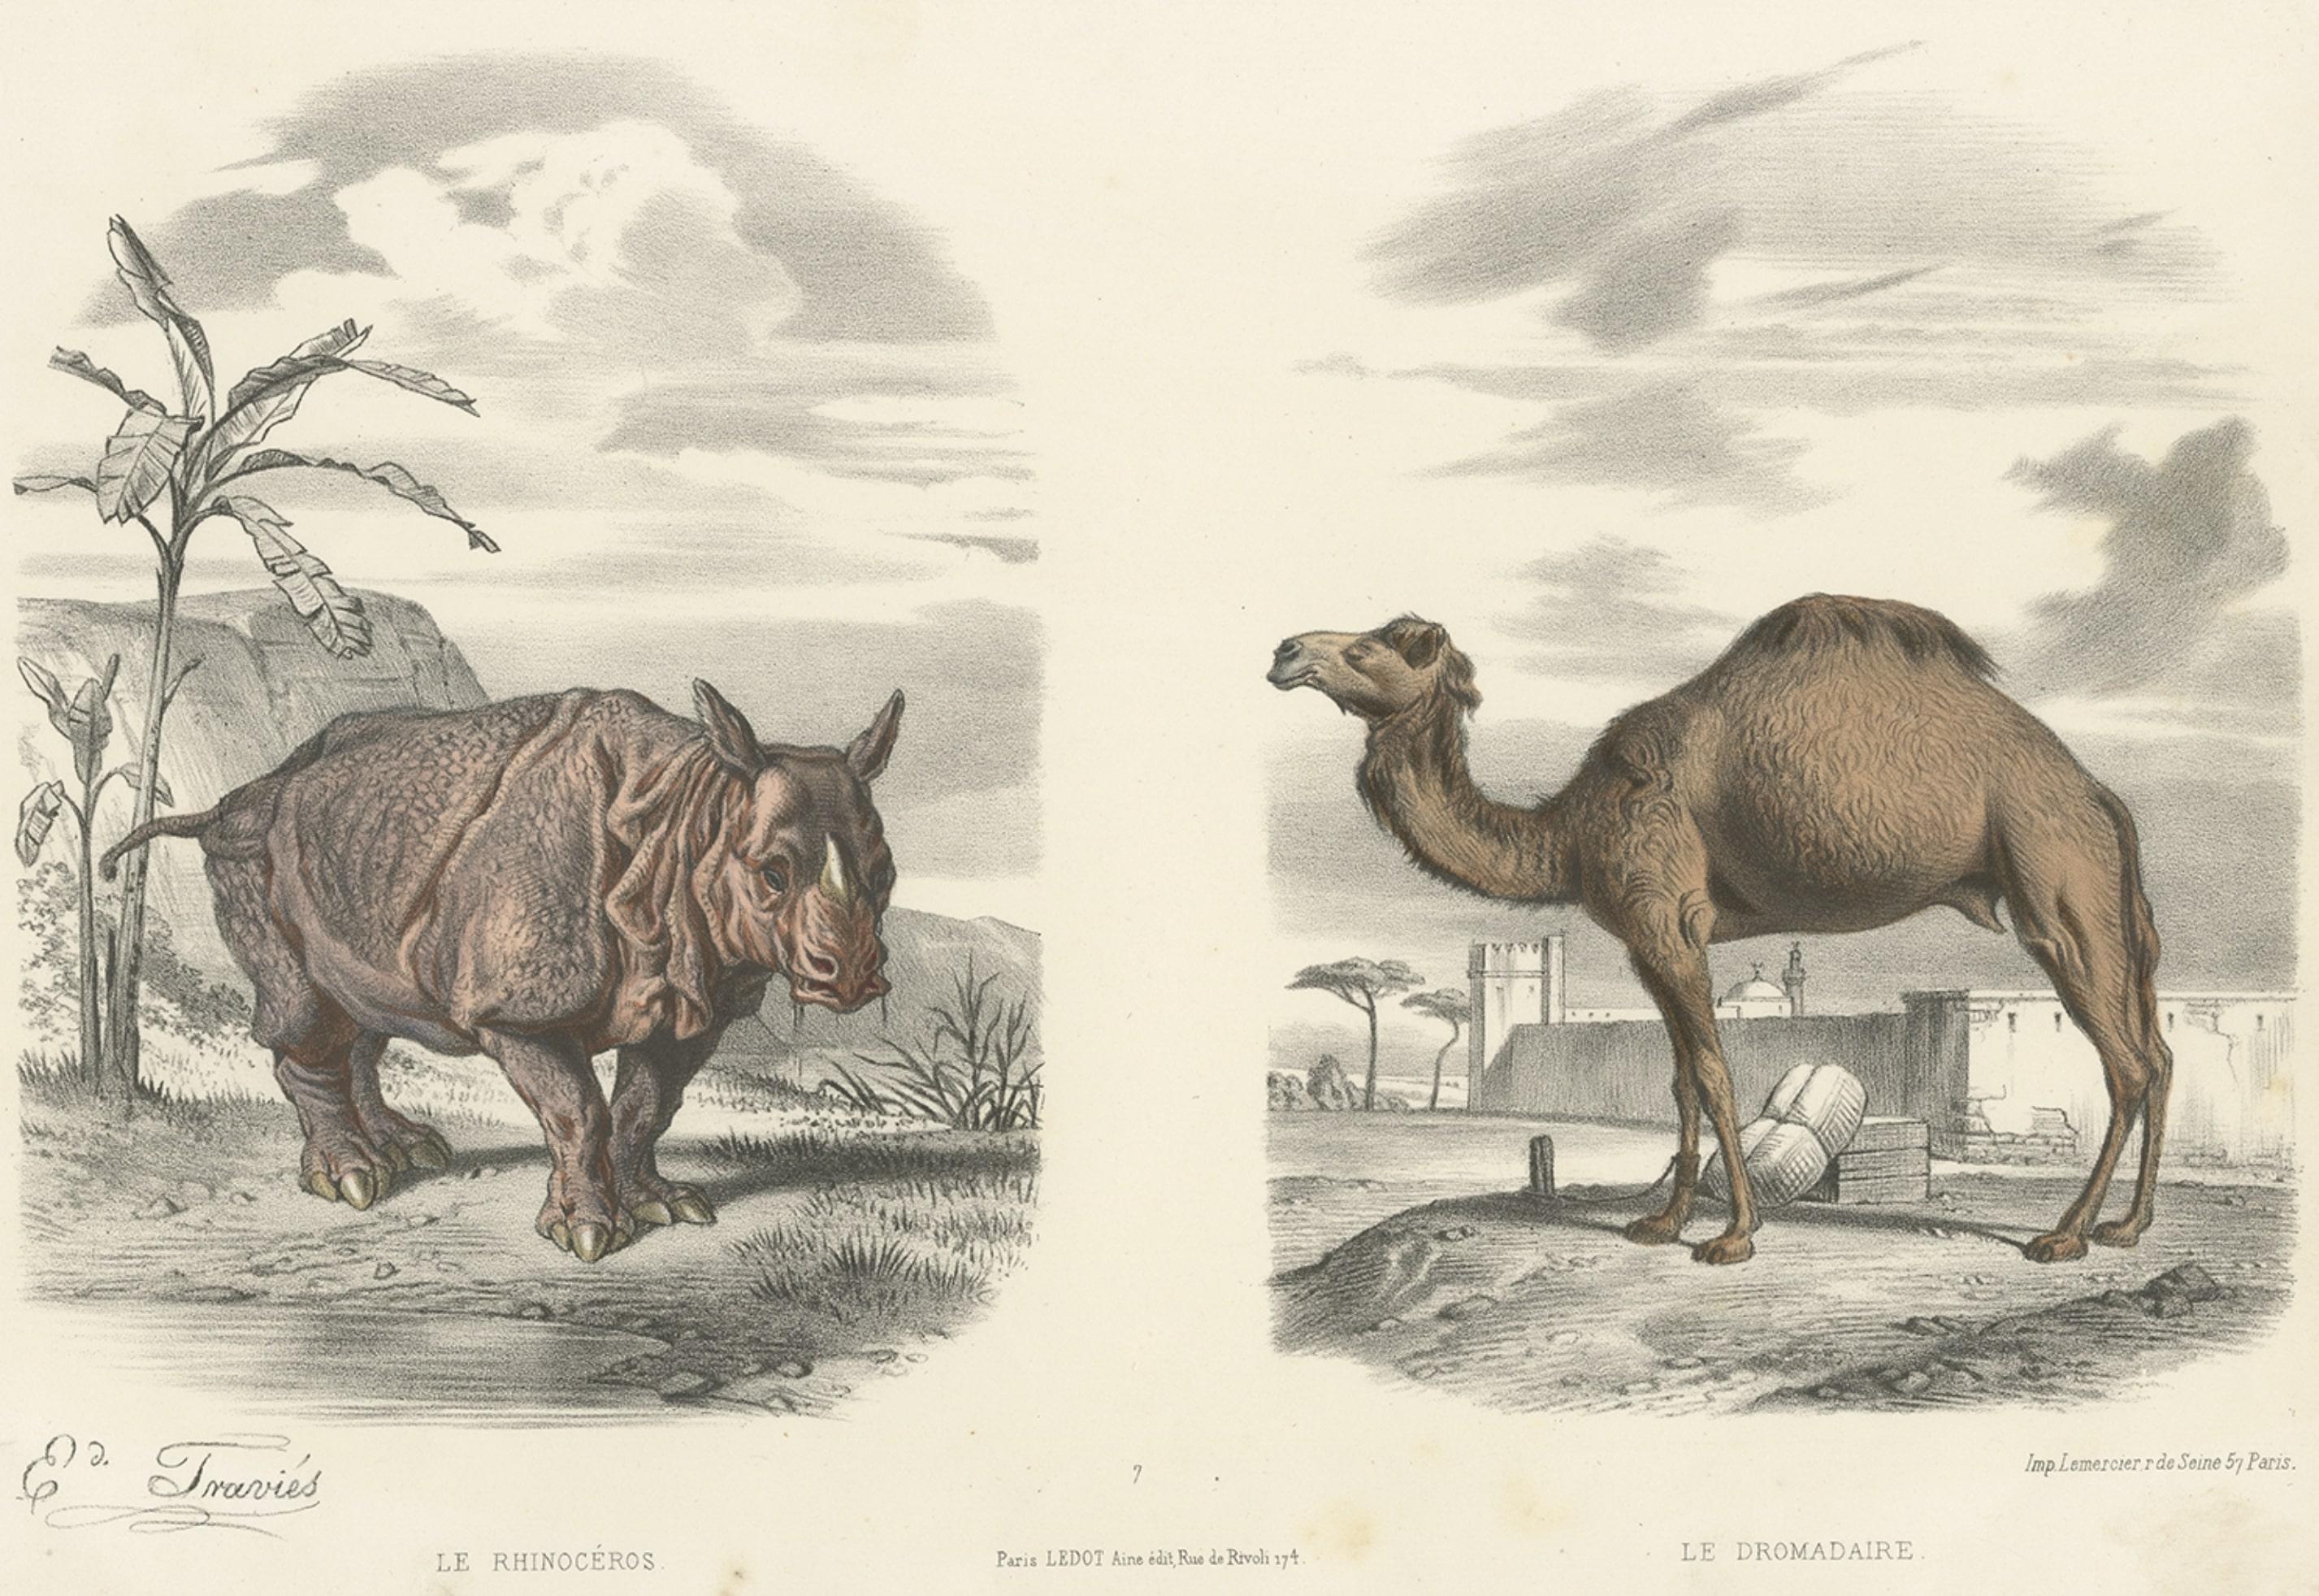 Antique print titled 'Le Rhinocéros - Le Dromadaire'. 

Old print of a Rhino and dromedary. This print originates from 'Types du regne animal; Buffon en estampes', a book with 48 hand-colored plates of animals.

Artists and Engravers: Édouard